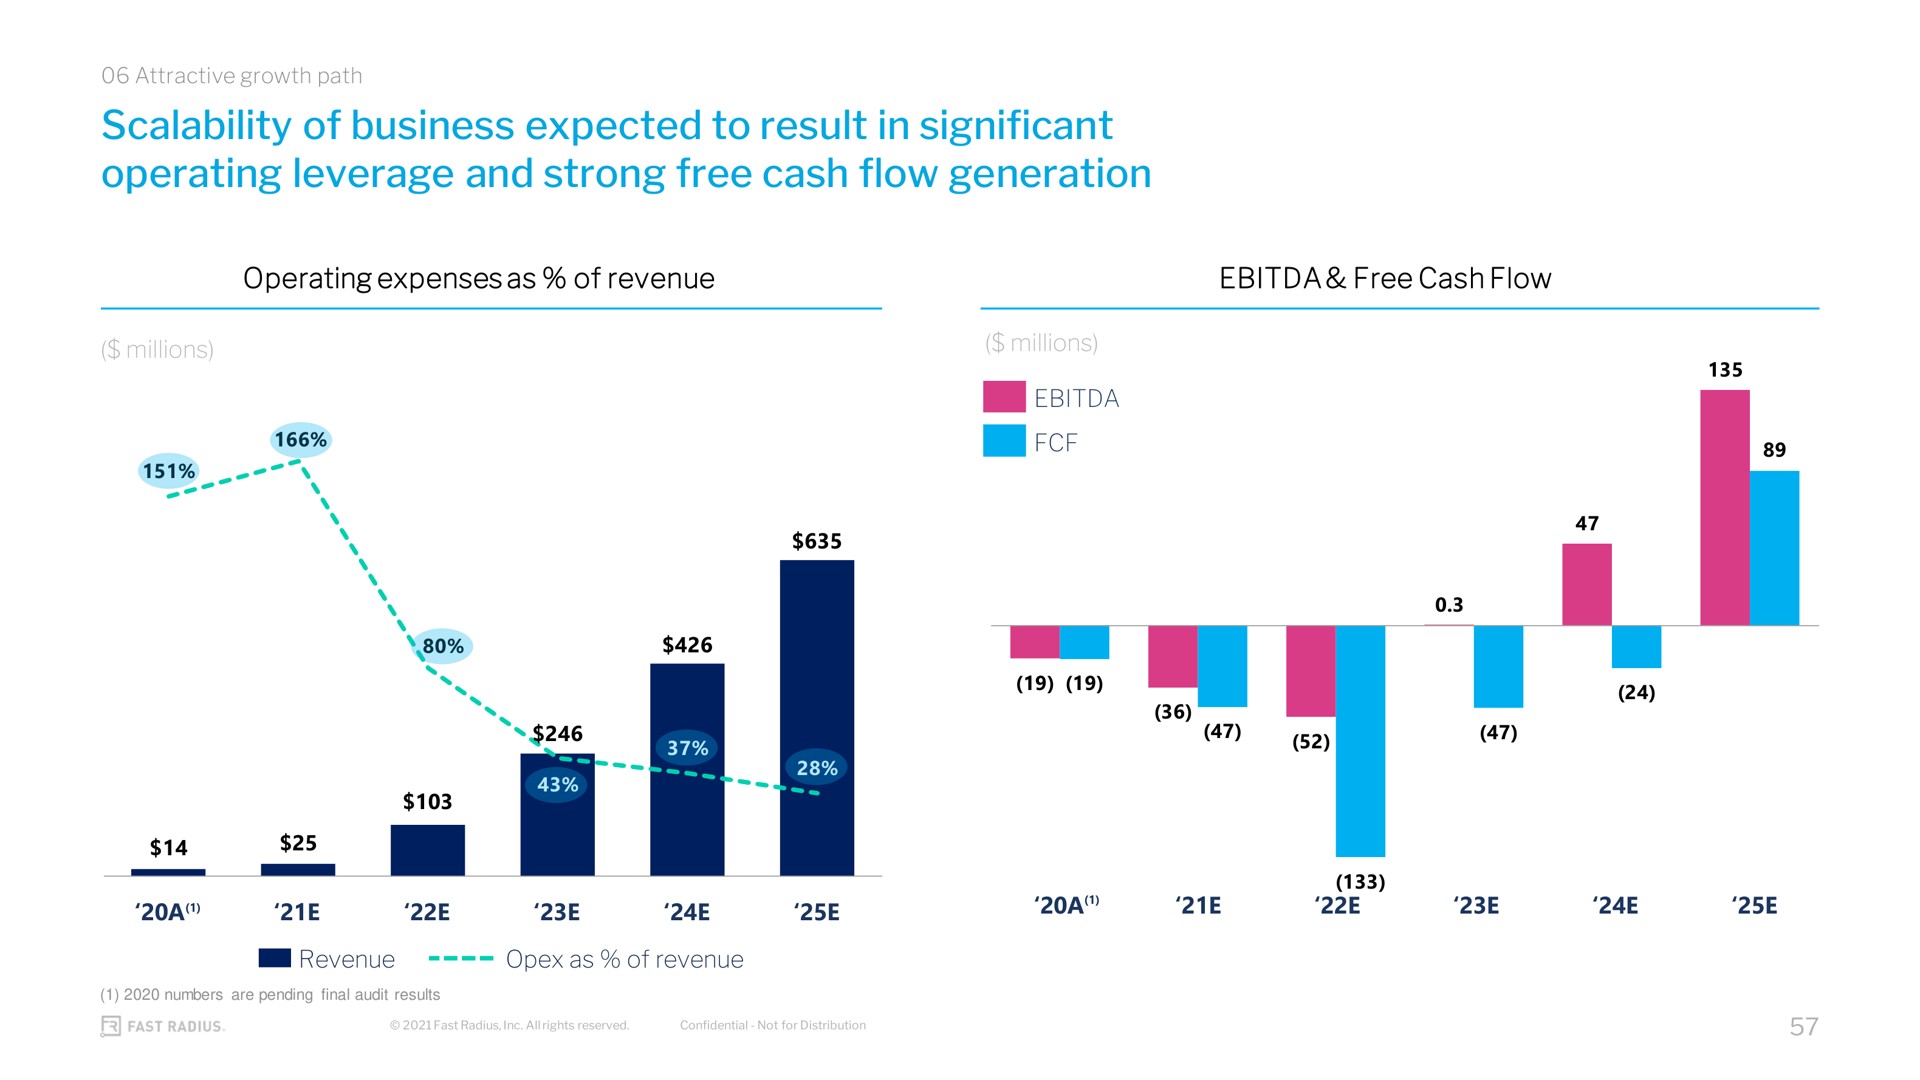 of business expected to result in significant operating leverage and strong free cash flow generation | Fast Radius